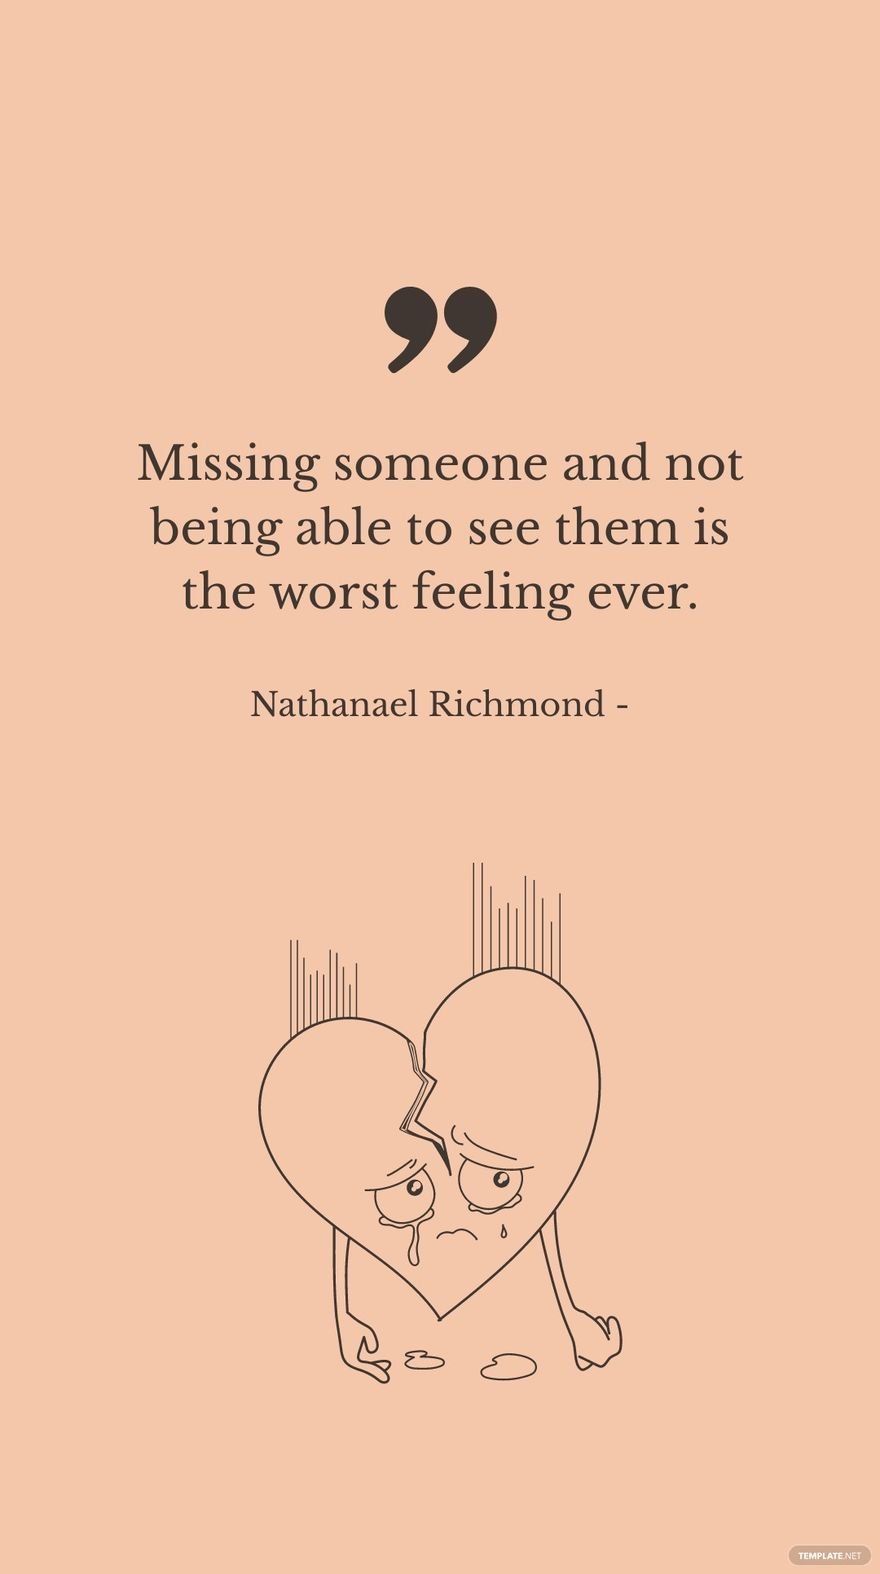 Free Nathanael Richmond - Missing someone and not being able to see them is the worst feeling ever. in JPG